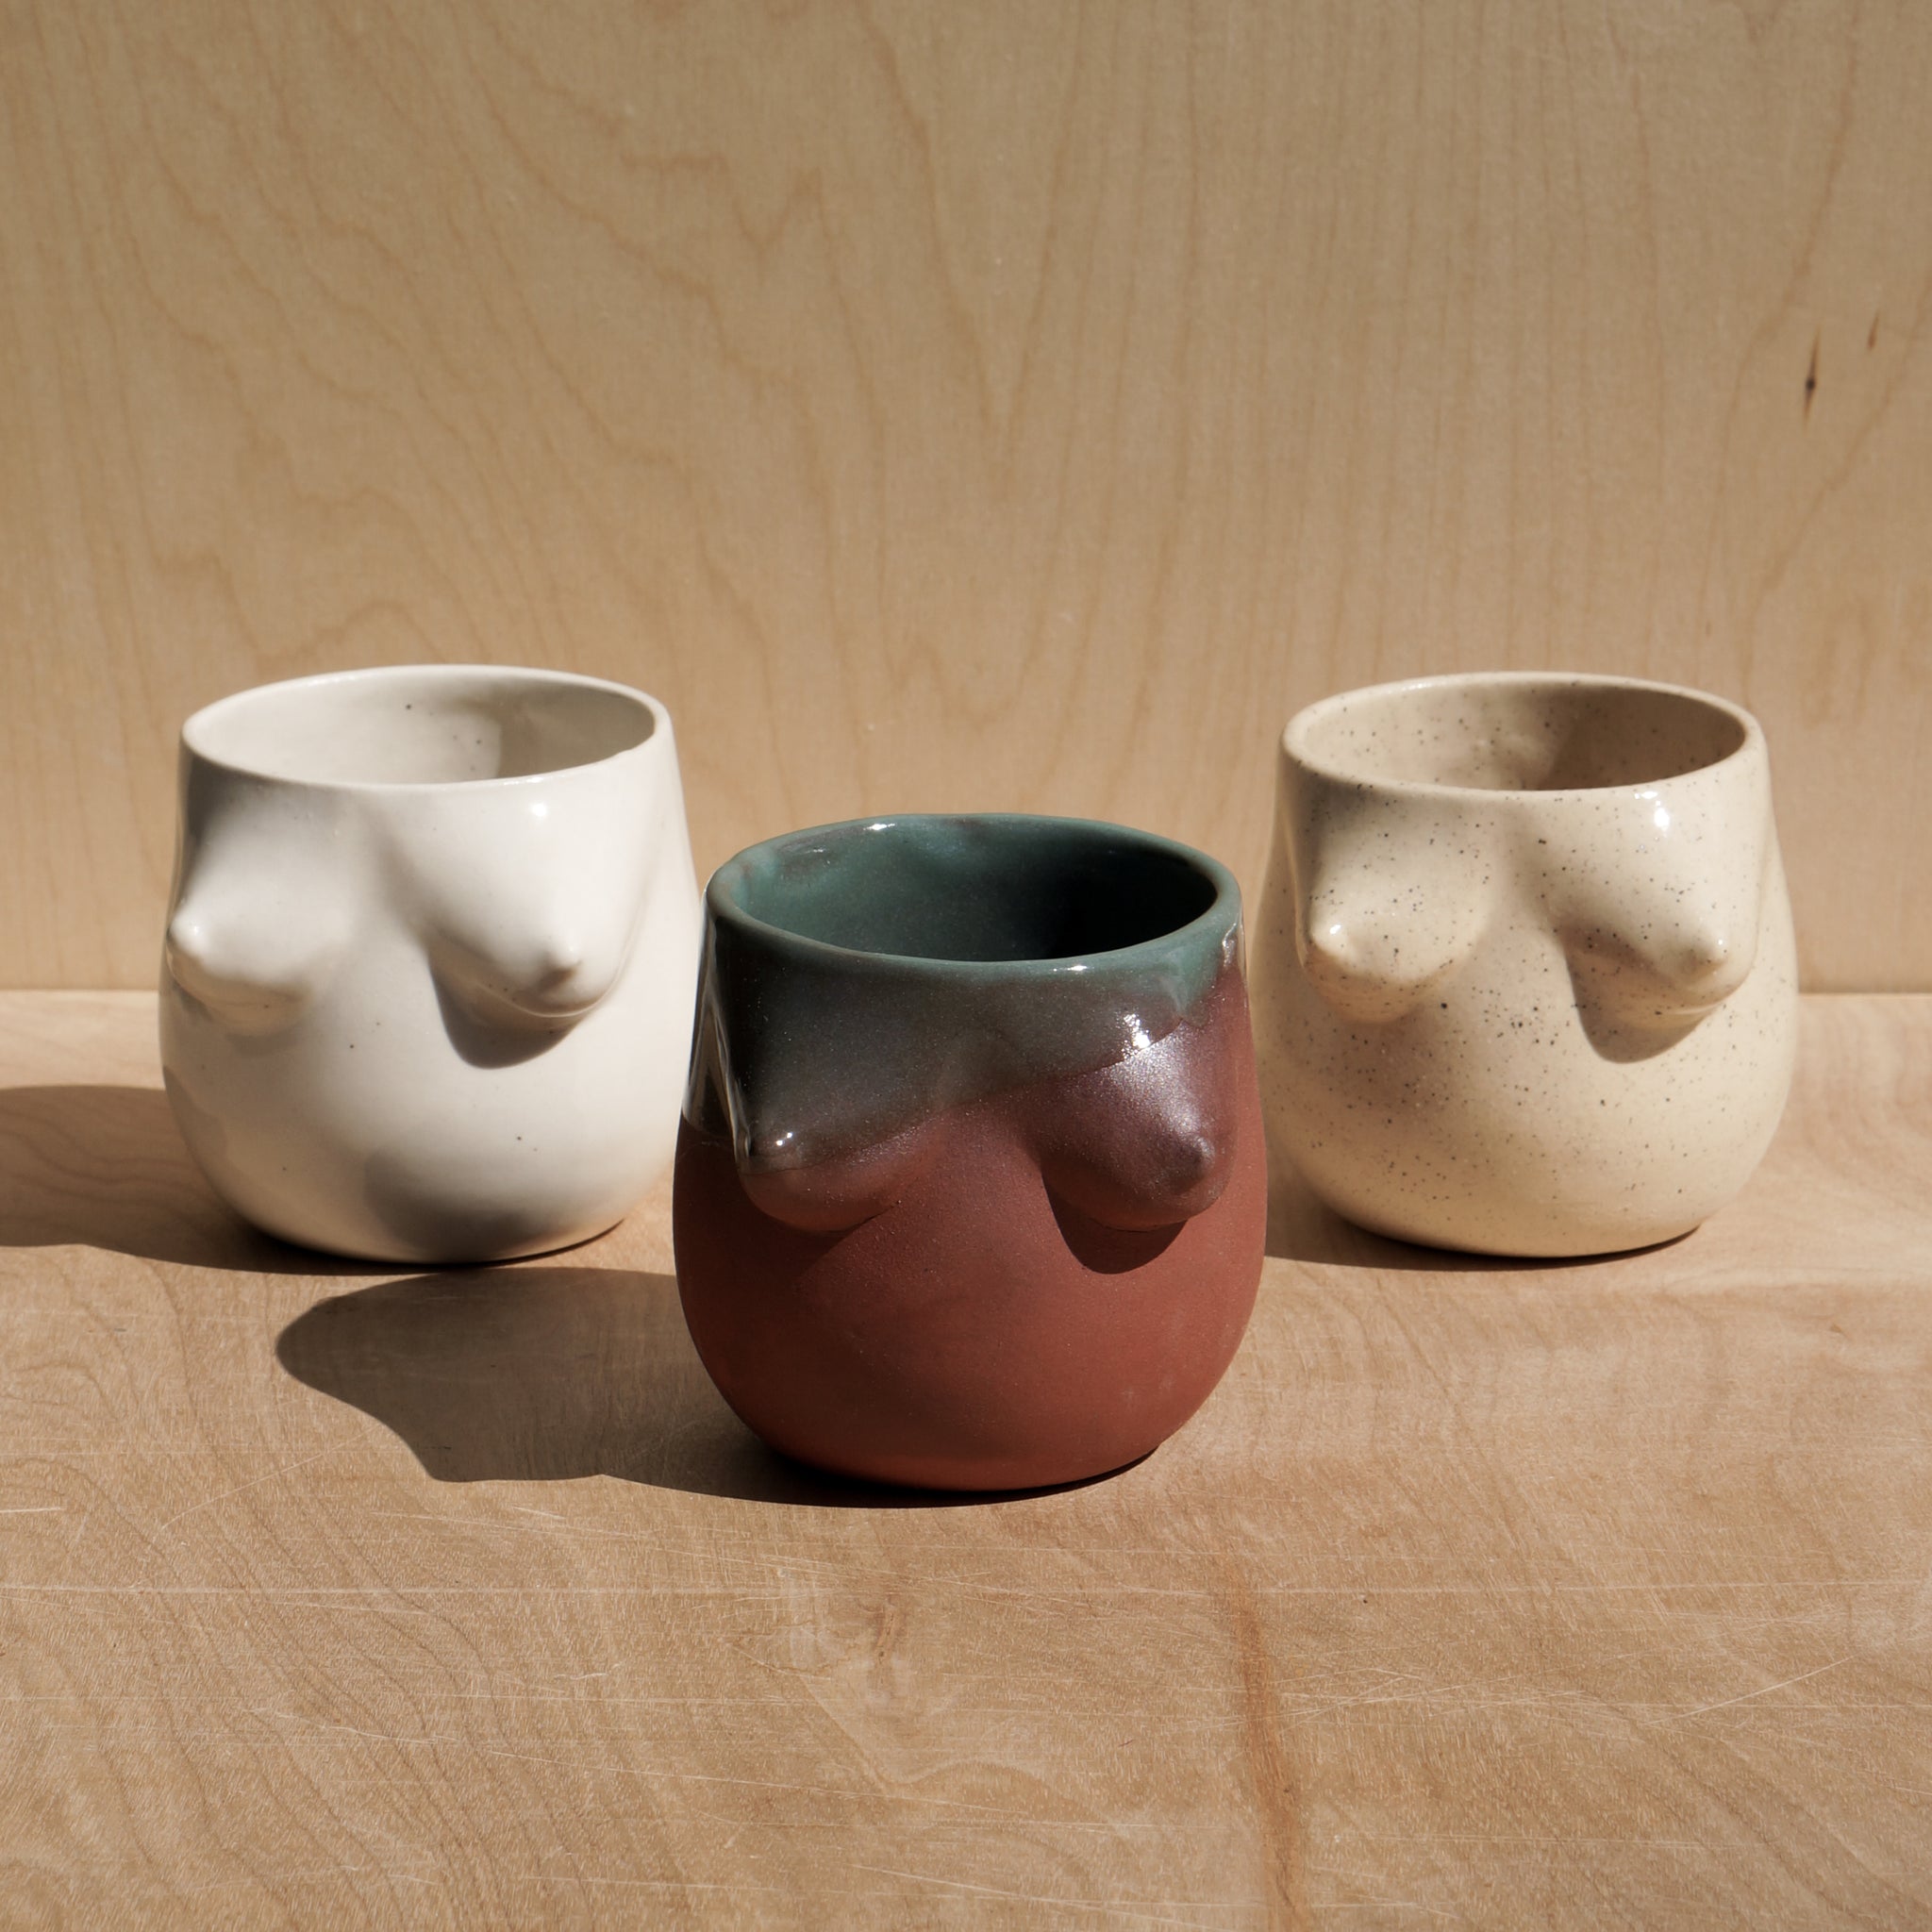 Ceramic tumblrs featuring the female form are pictured next to one another. From left,  a white ceramic tumbler, a rust red with a teal glass dripping down the side, and a speckled off white tumbler. 